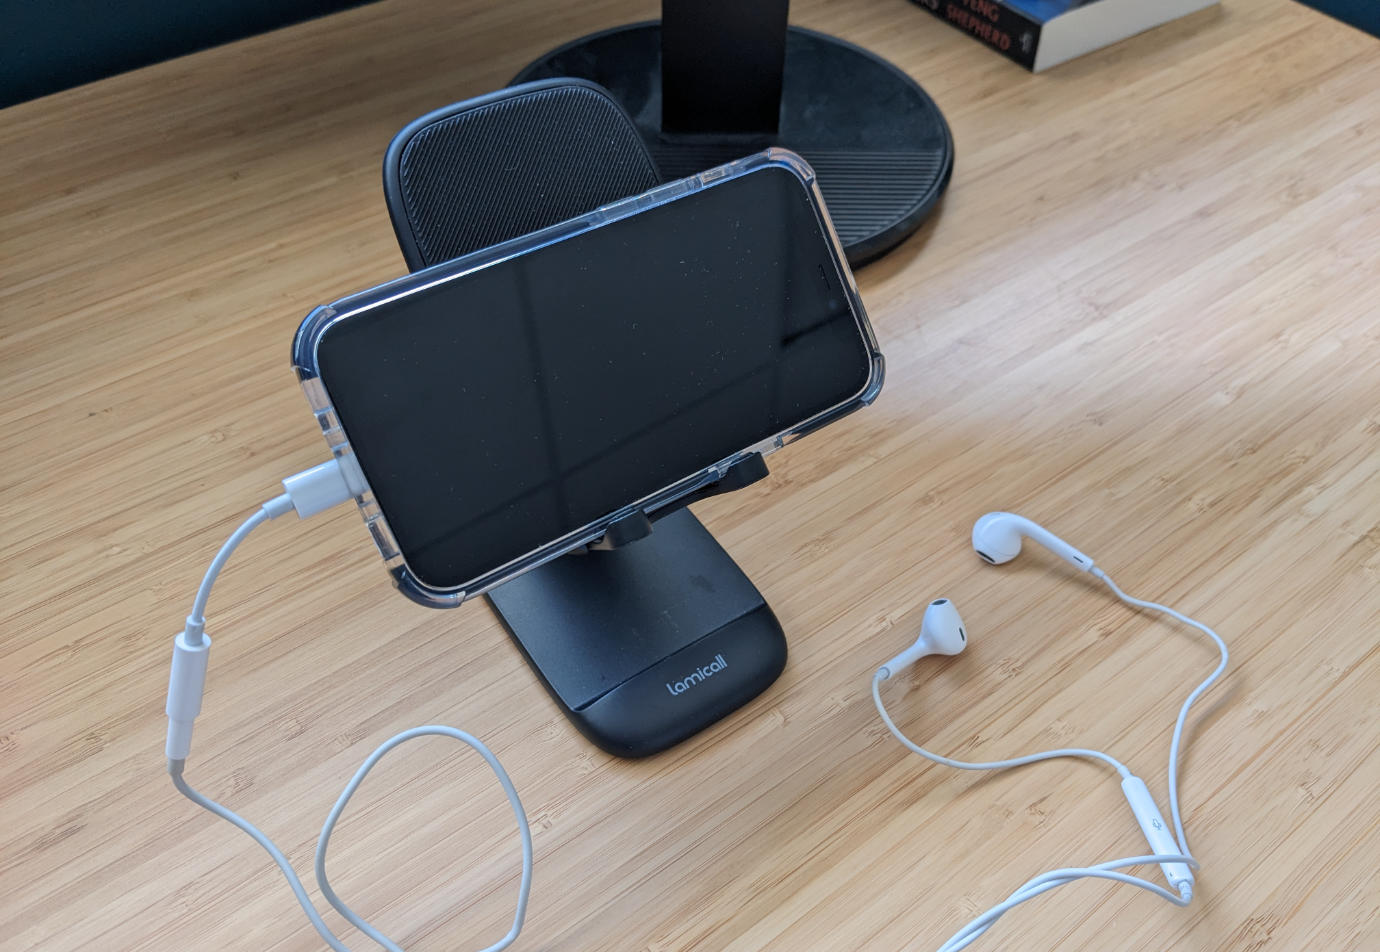 An iPhone sitting on a portable phone stand with a Lightning-to-headphone jack adapter and wired headphones plugged into it.